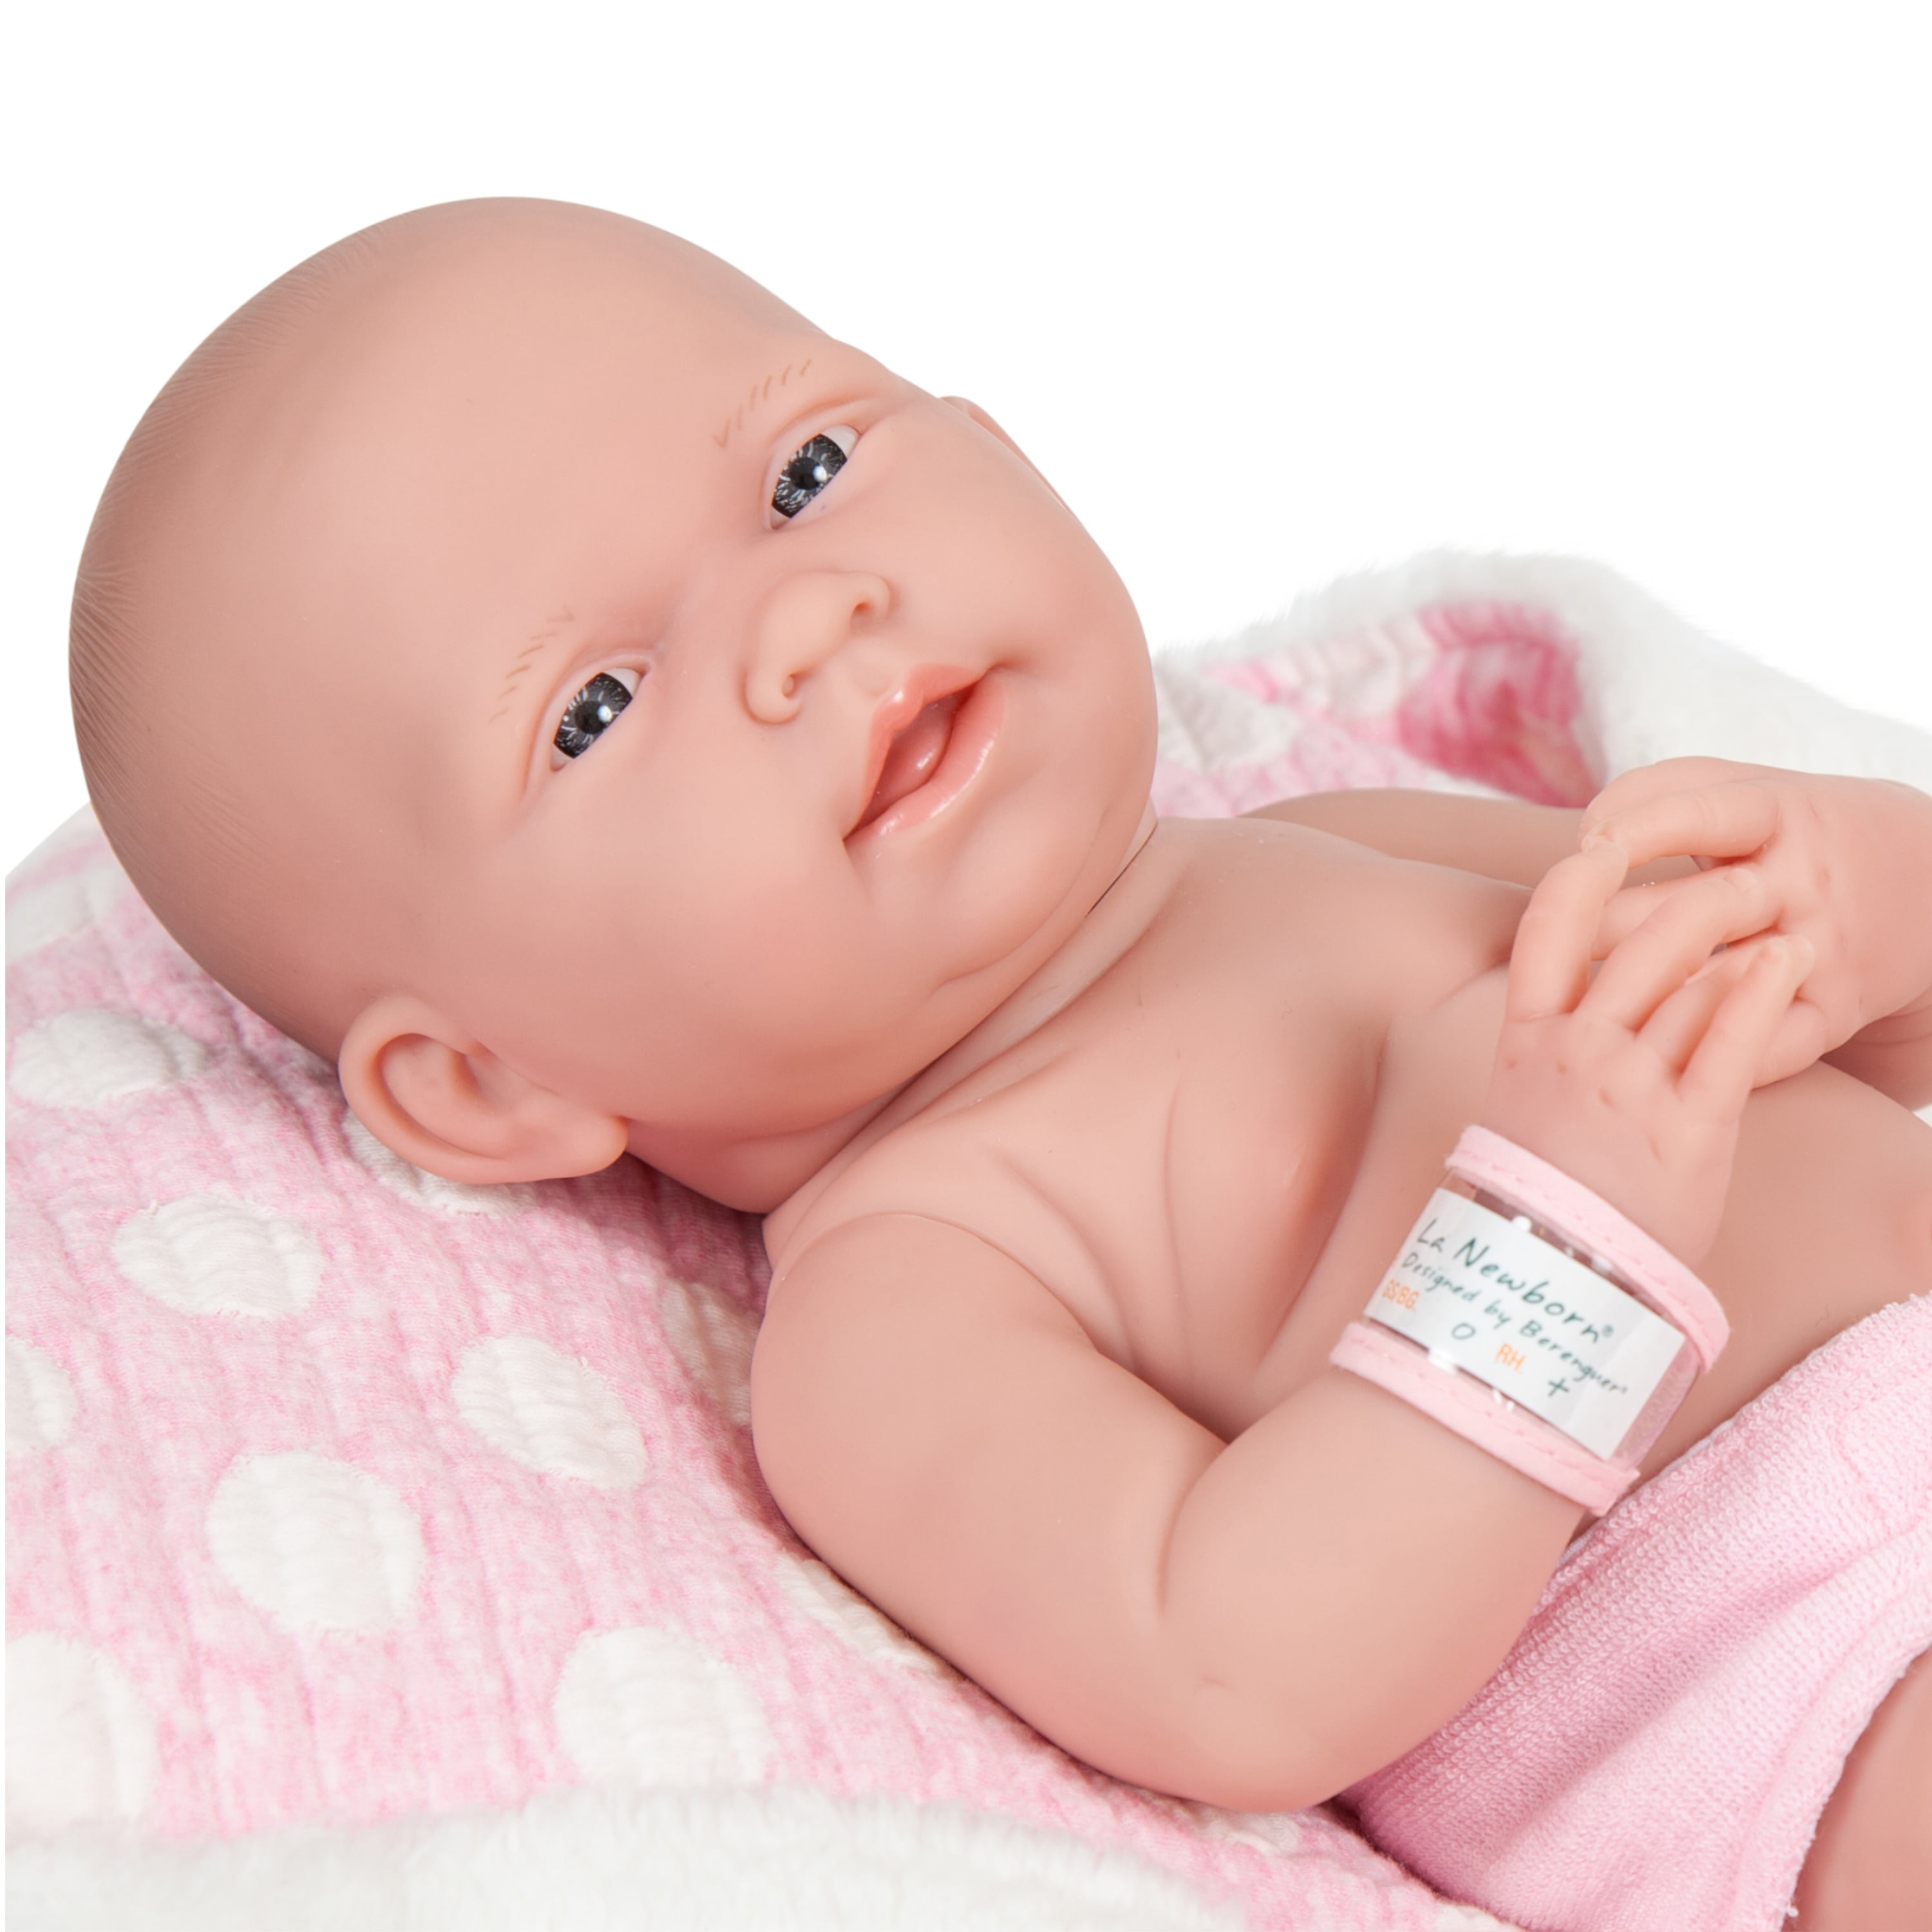 Real Girl Baby Doll 15 | Anatomically Correct | JC Toys - La Newborn |  Made in Spain | Pink Knit Outfit & Accessories | Ages 2+